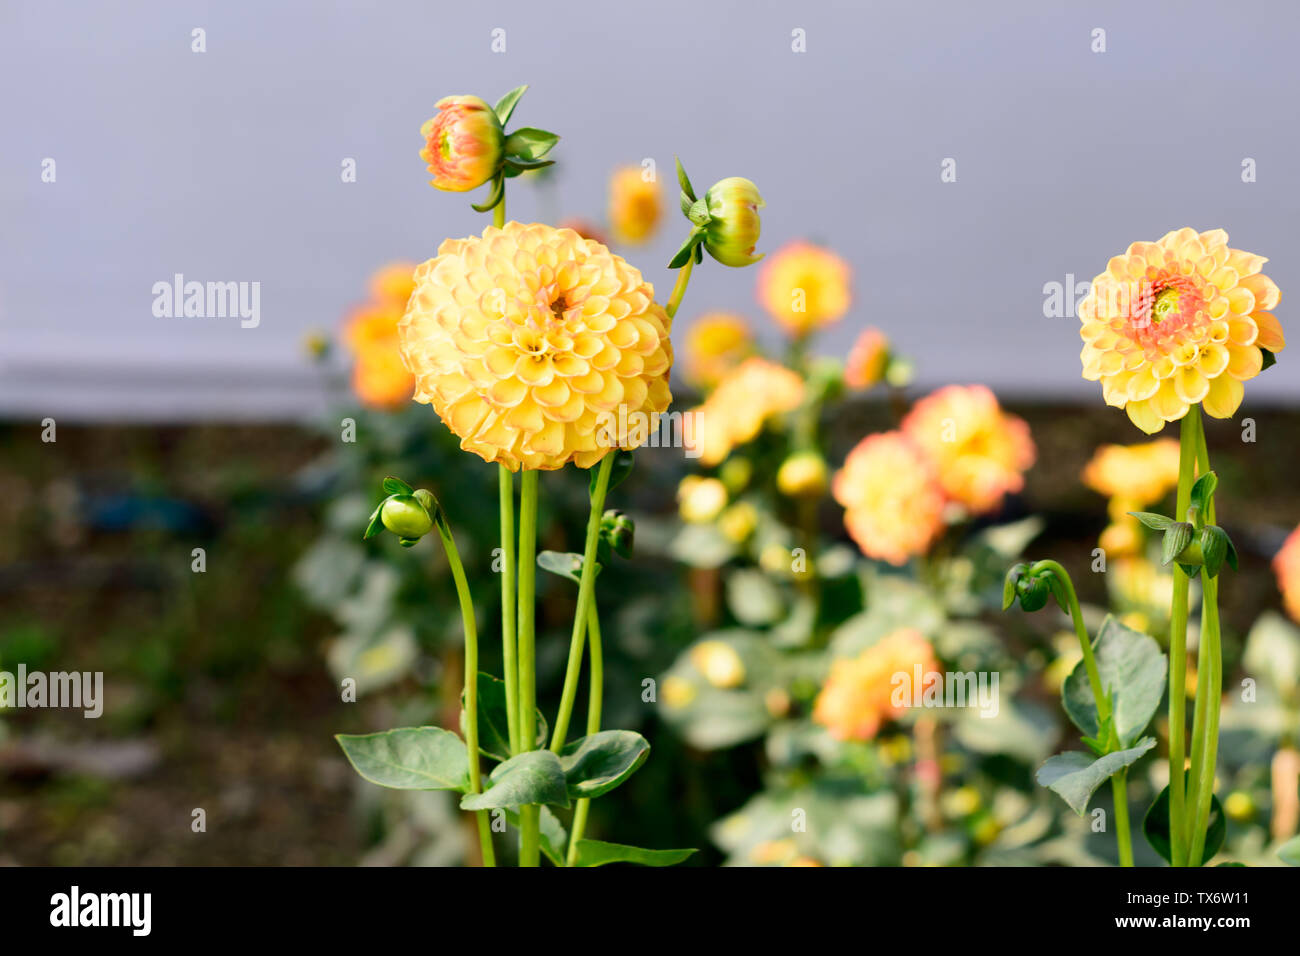 Marigolds (Tagetes erecta, Mexican marigold, Aztec marigold, African marigold) blossoming in the summer in a garden. It is a sun loving plant Blooms i Stock Photo